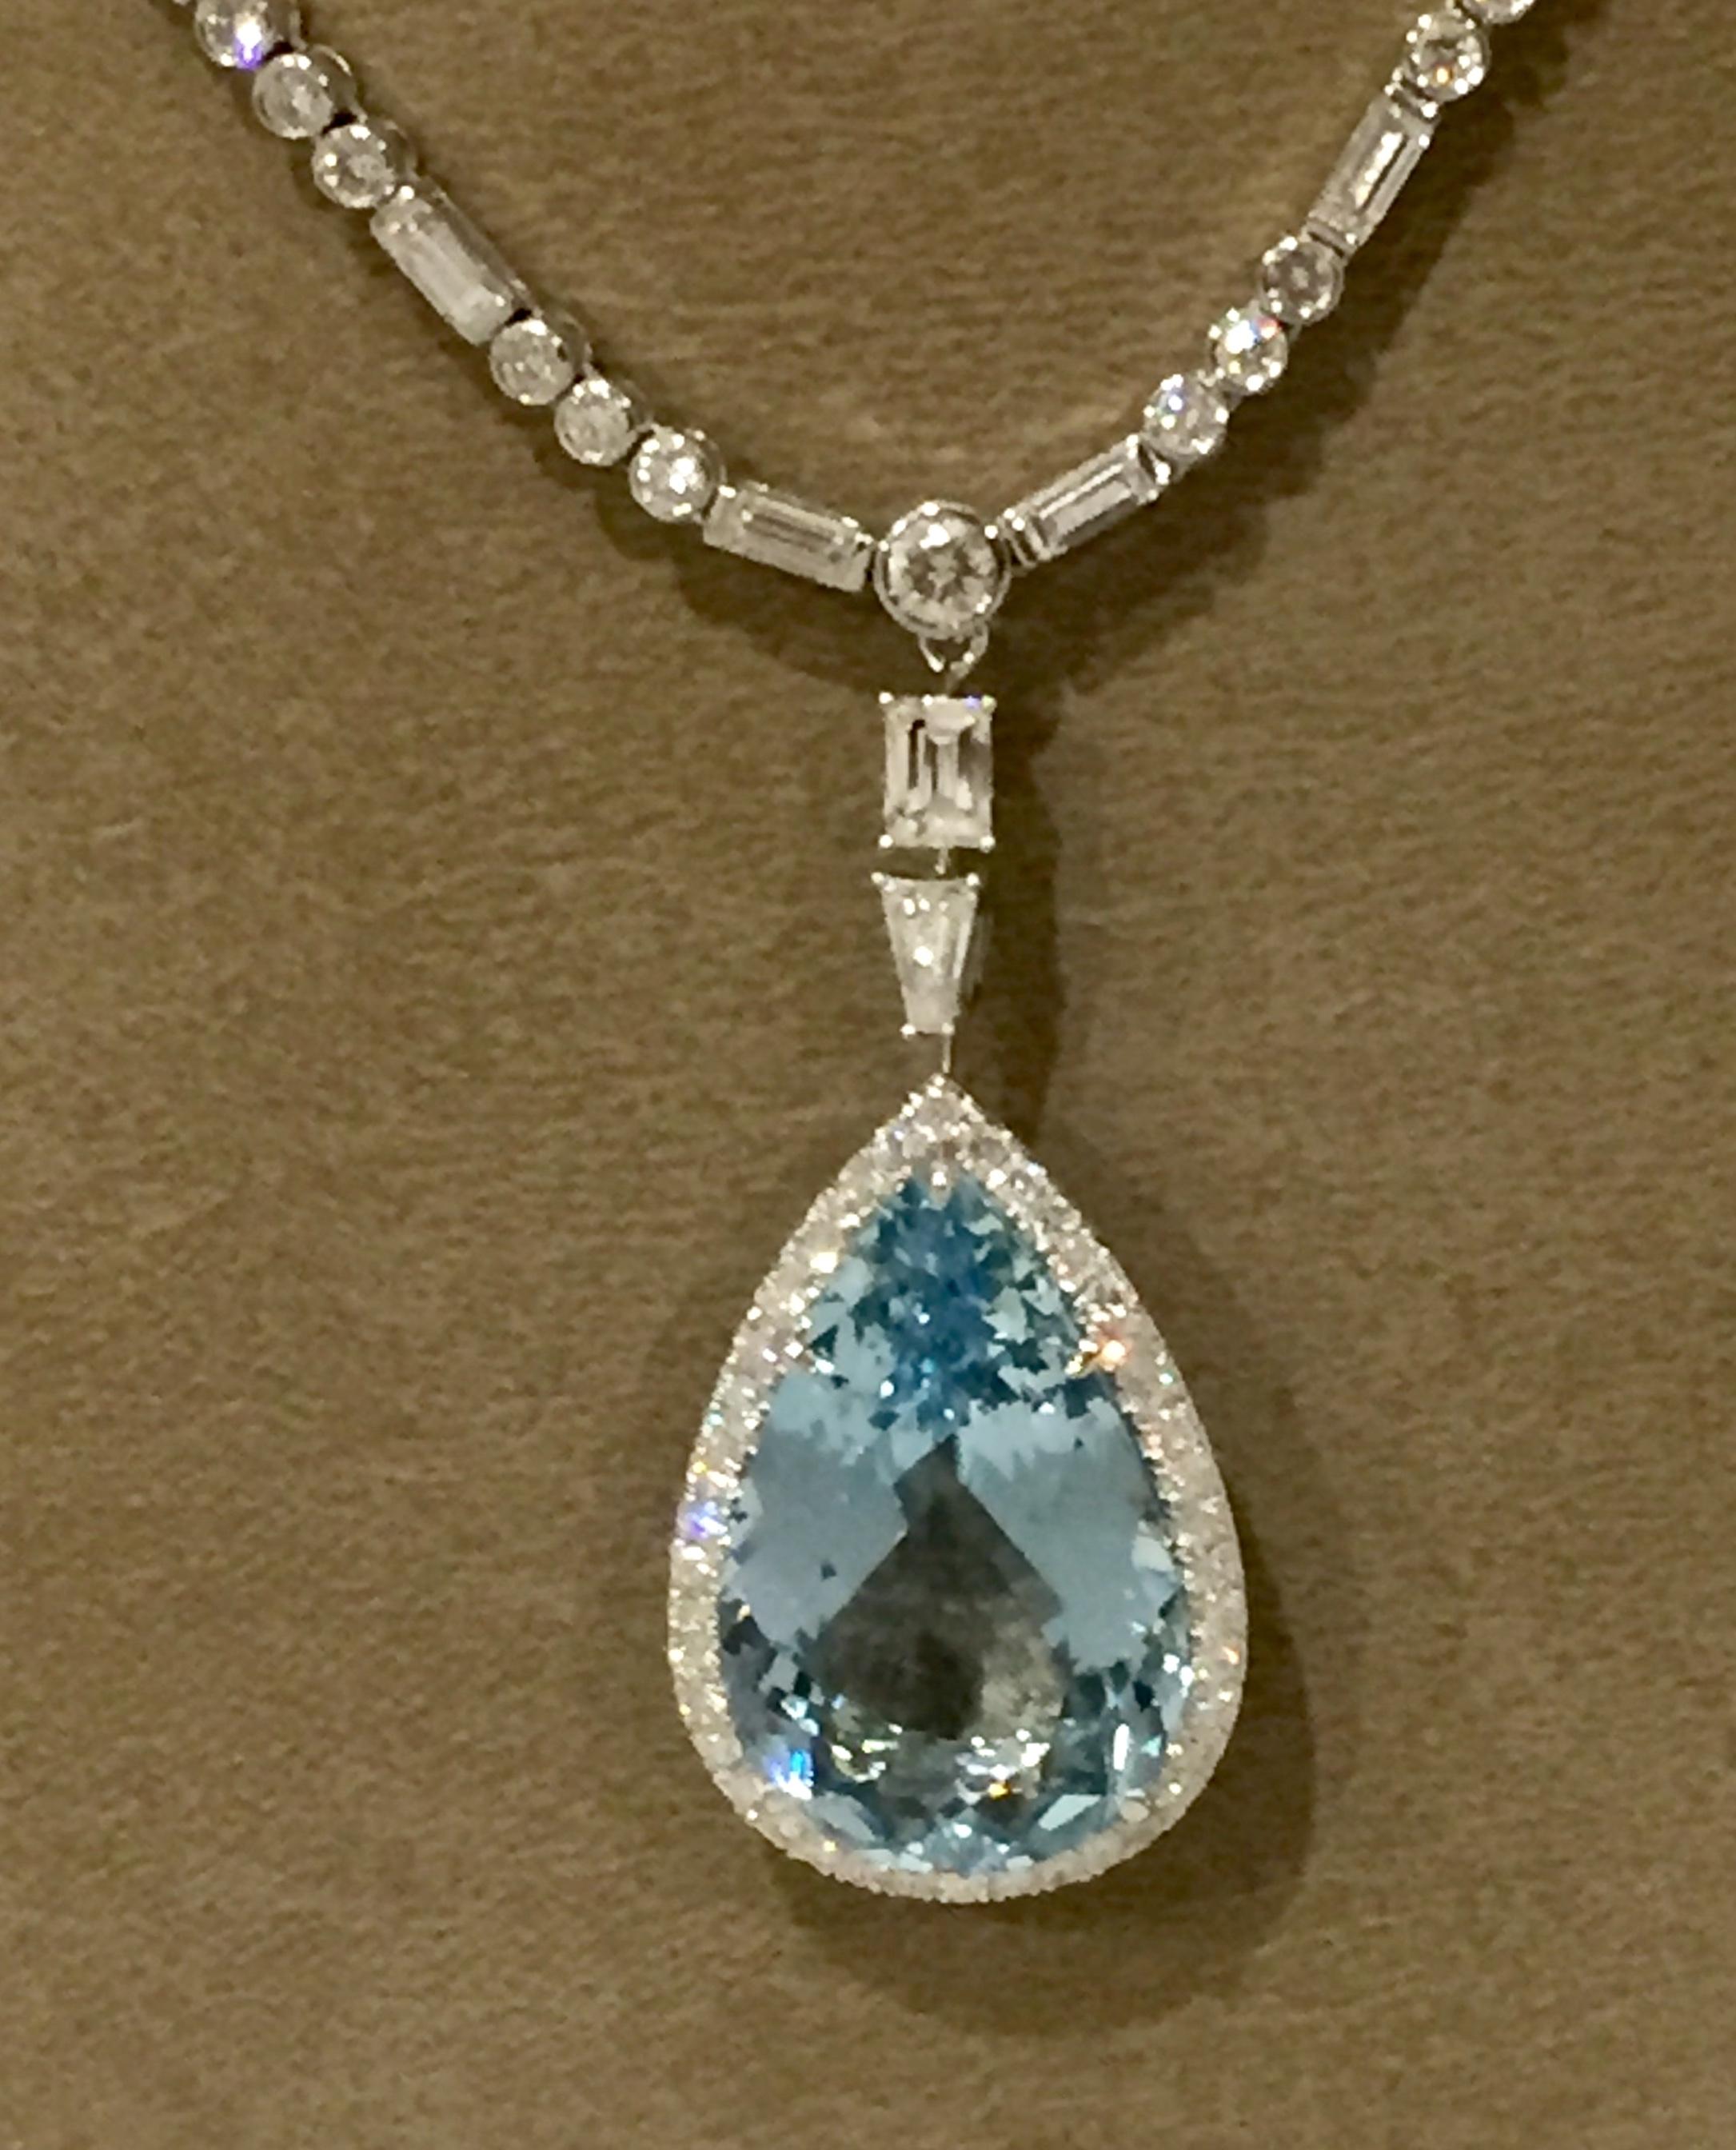 Beautiful Diamond Necklace with Aquamarine-Diamond-Pendant, made in Platinum 950 and White Gold 750! The necklace is set with 61 brilliant cut diamonds weighing 1.95 ct, G, vs, and 20 baguette diamonds of 1.91 ct, G, vs. 
The fine pear shaped